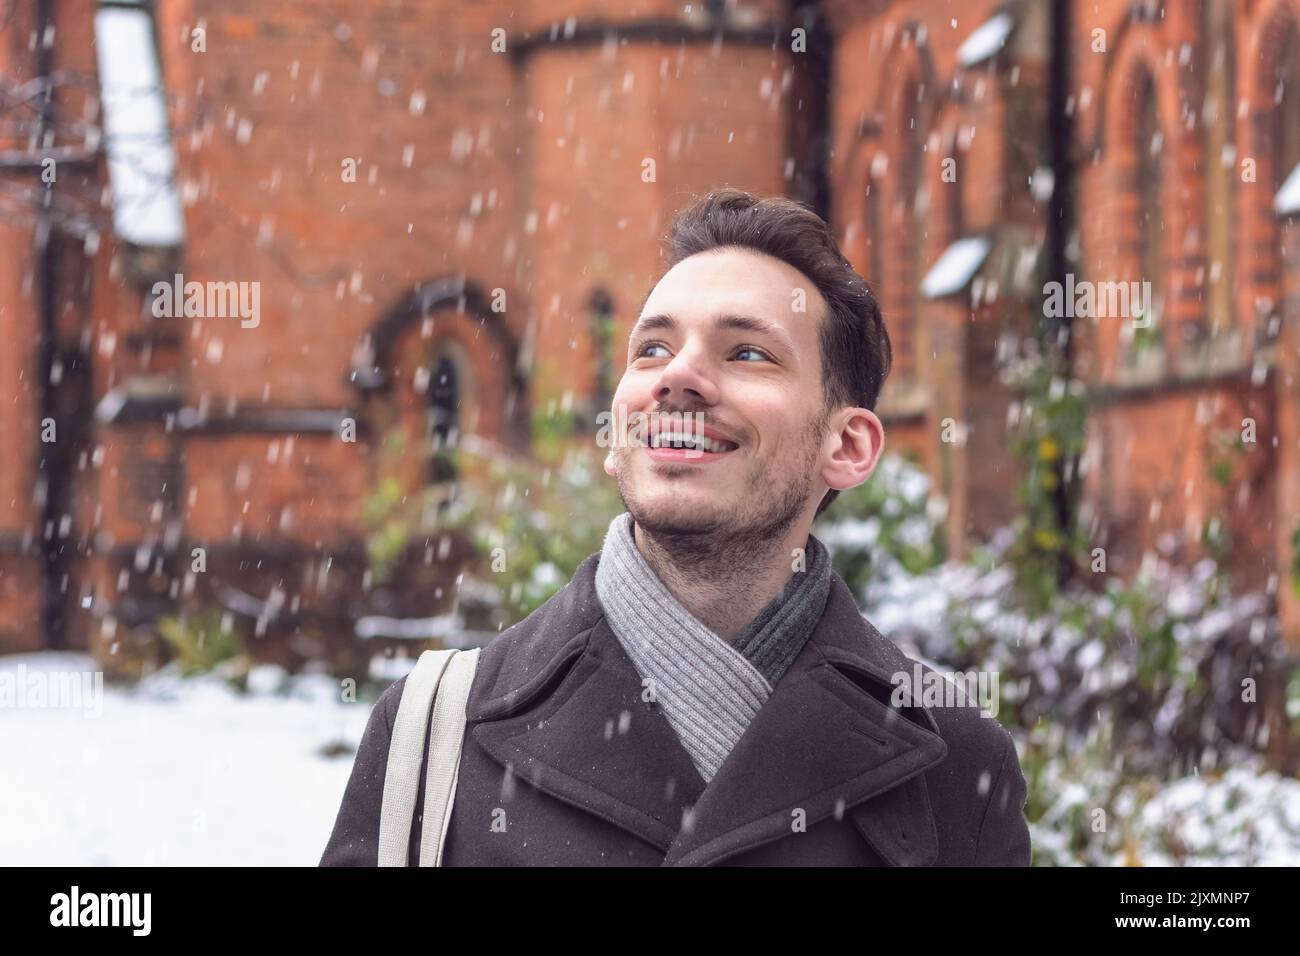 Portrait of a happy smiling man amazed by falling snow in winter Stock Photo